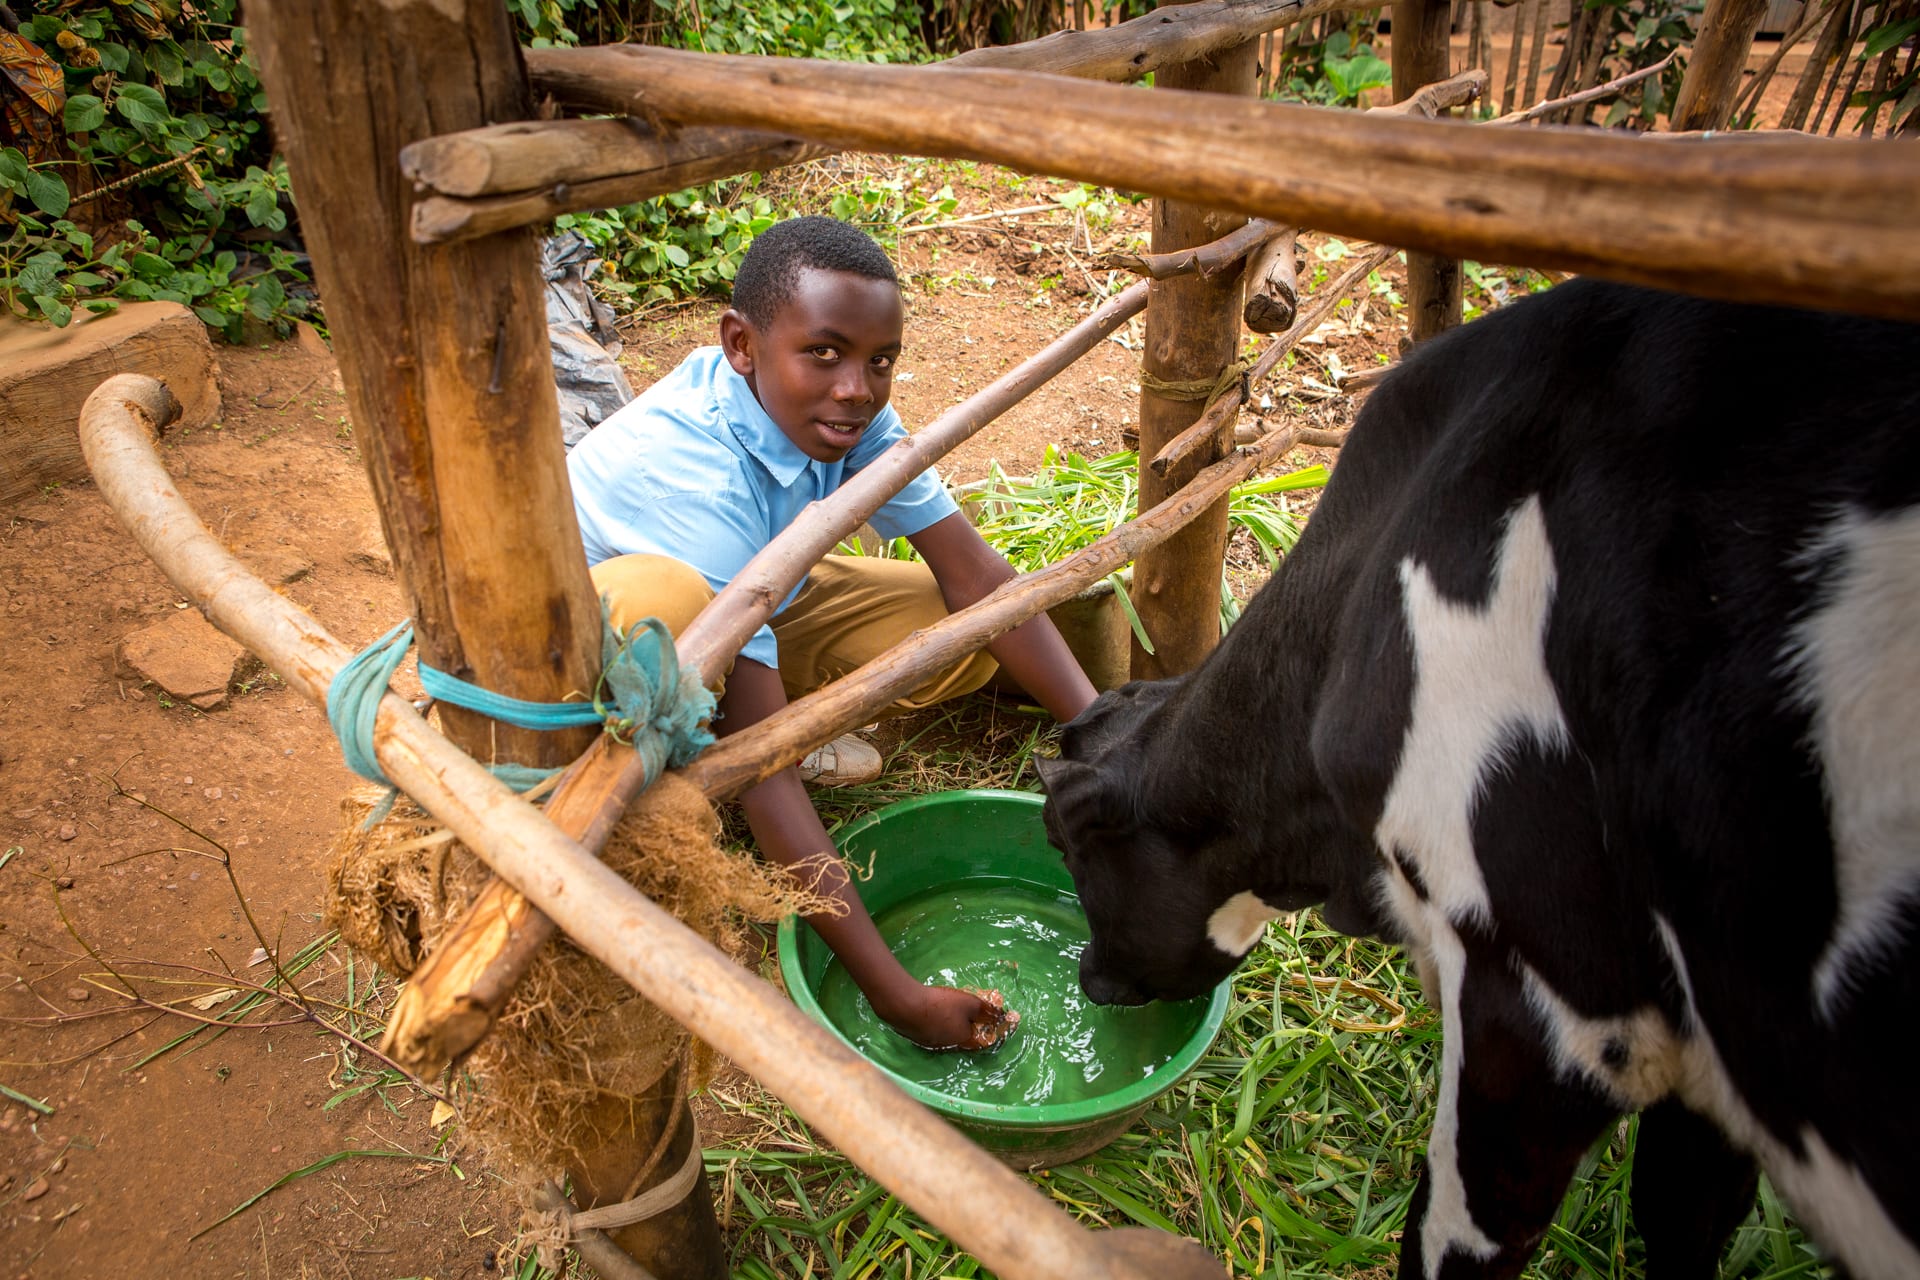 Little boy, Felix gives his cow a drink of water out of a green bucket.